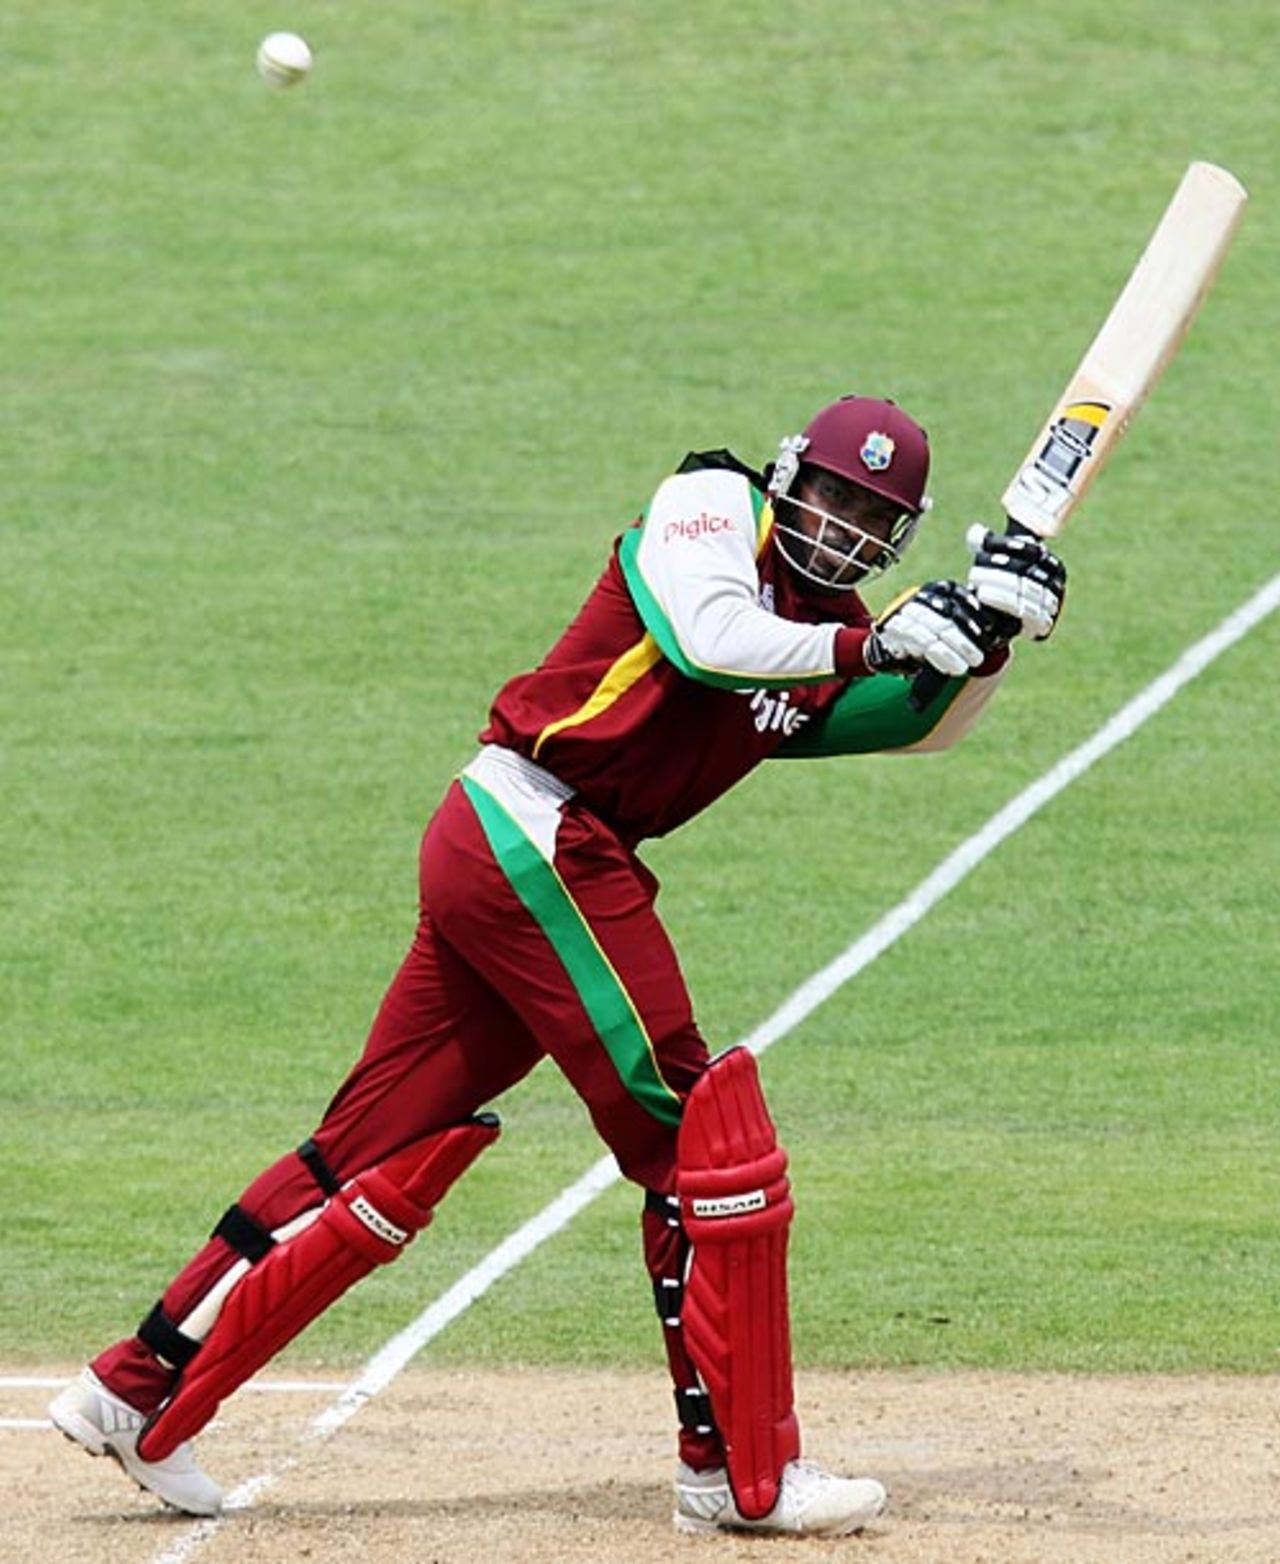 Chris Gayle whips one over square leg, New Zealand v West Indies, 5th ODI, Napier, January 13, 2009